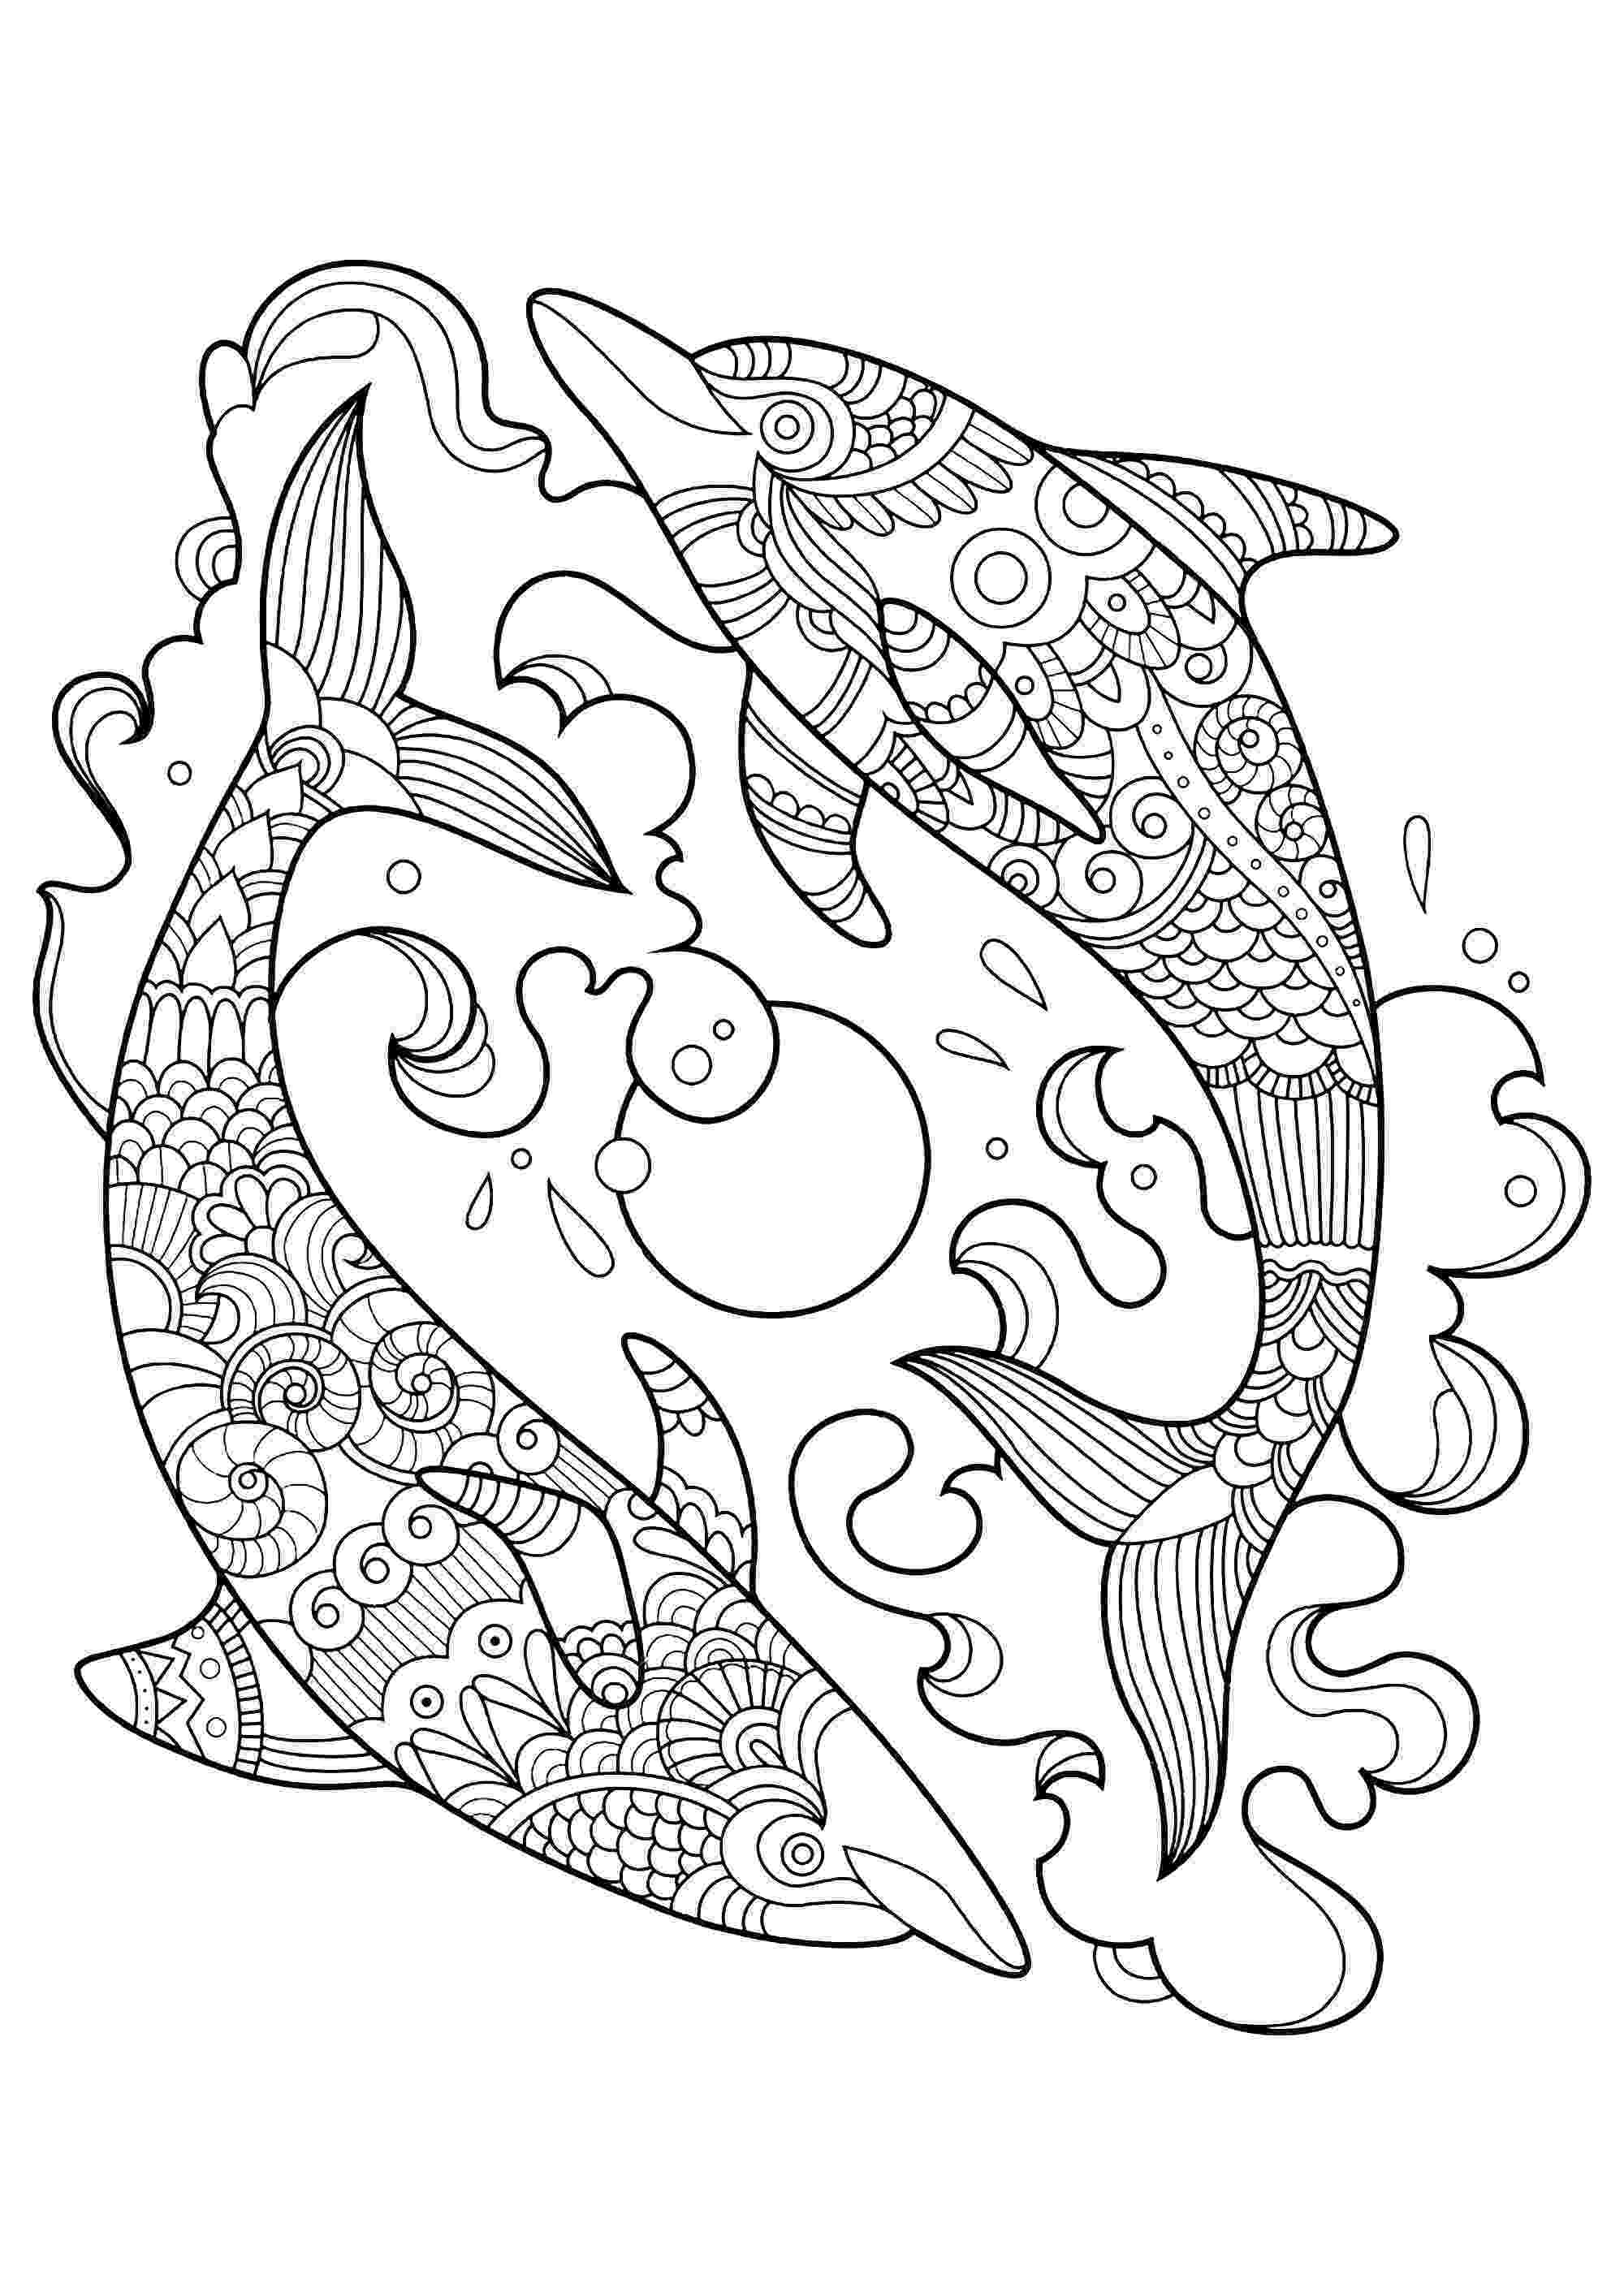 dolphin coloring pages dolphins coloring pages hellokidscom dolphin coloring pages 